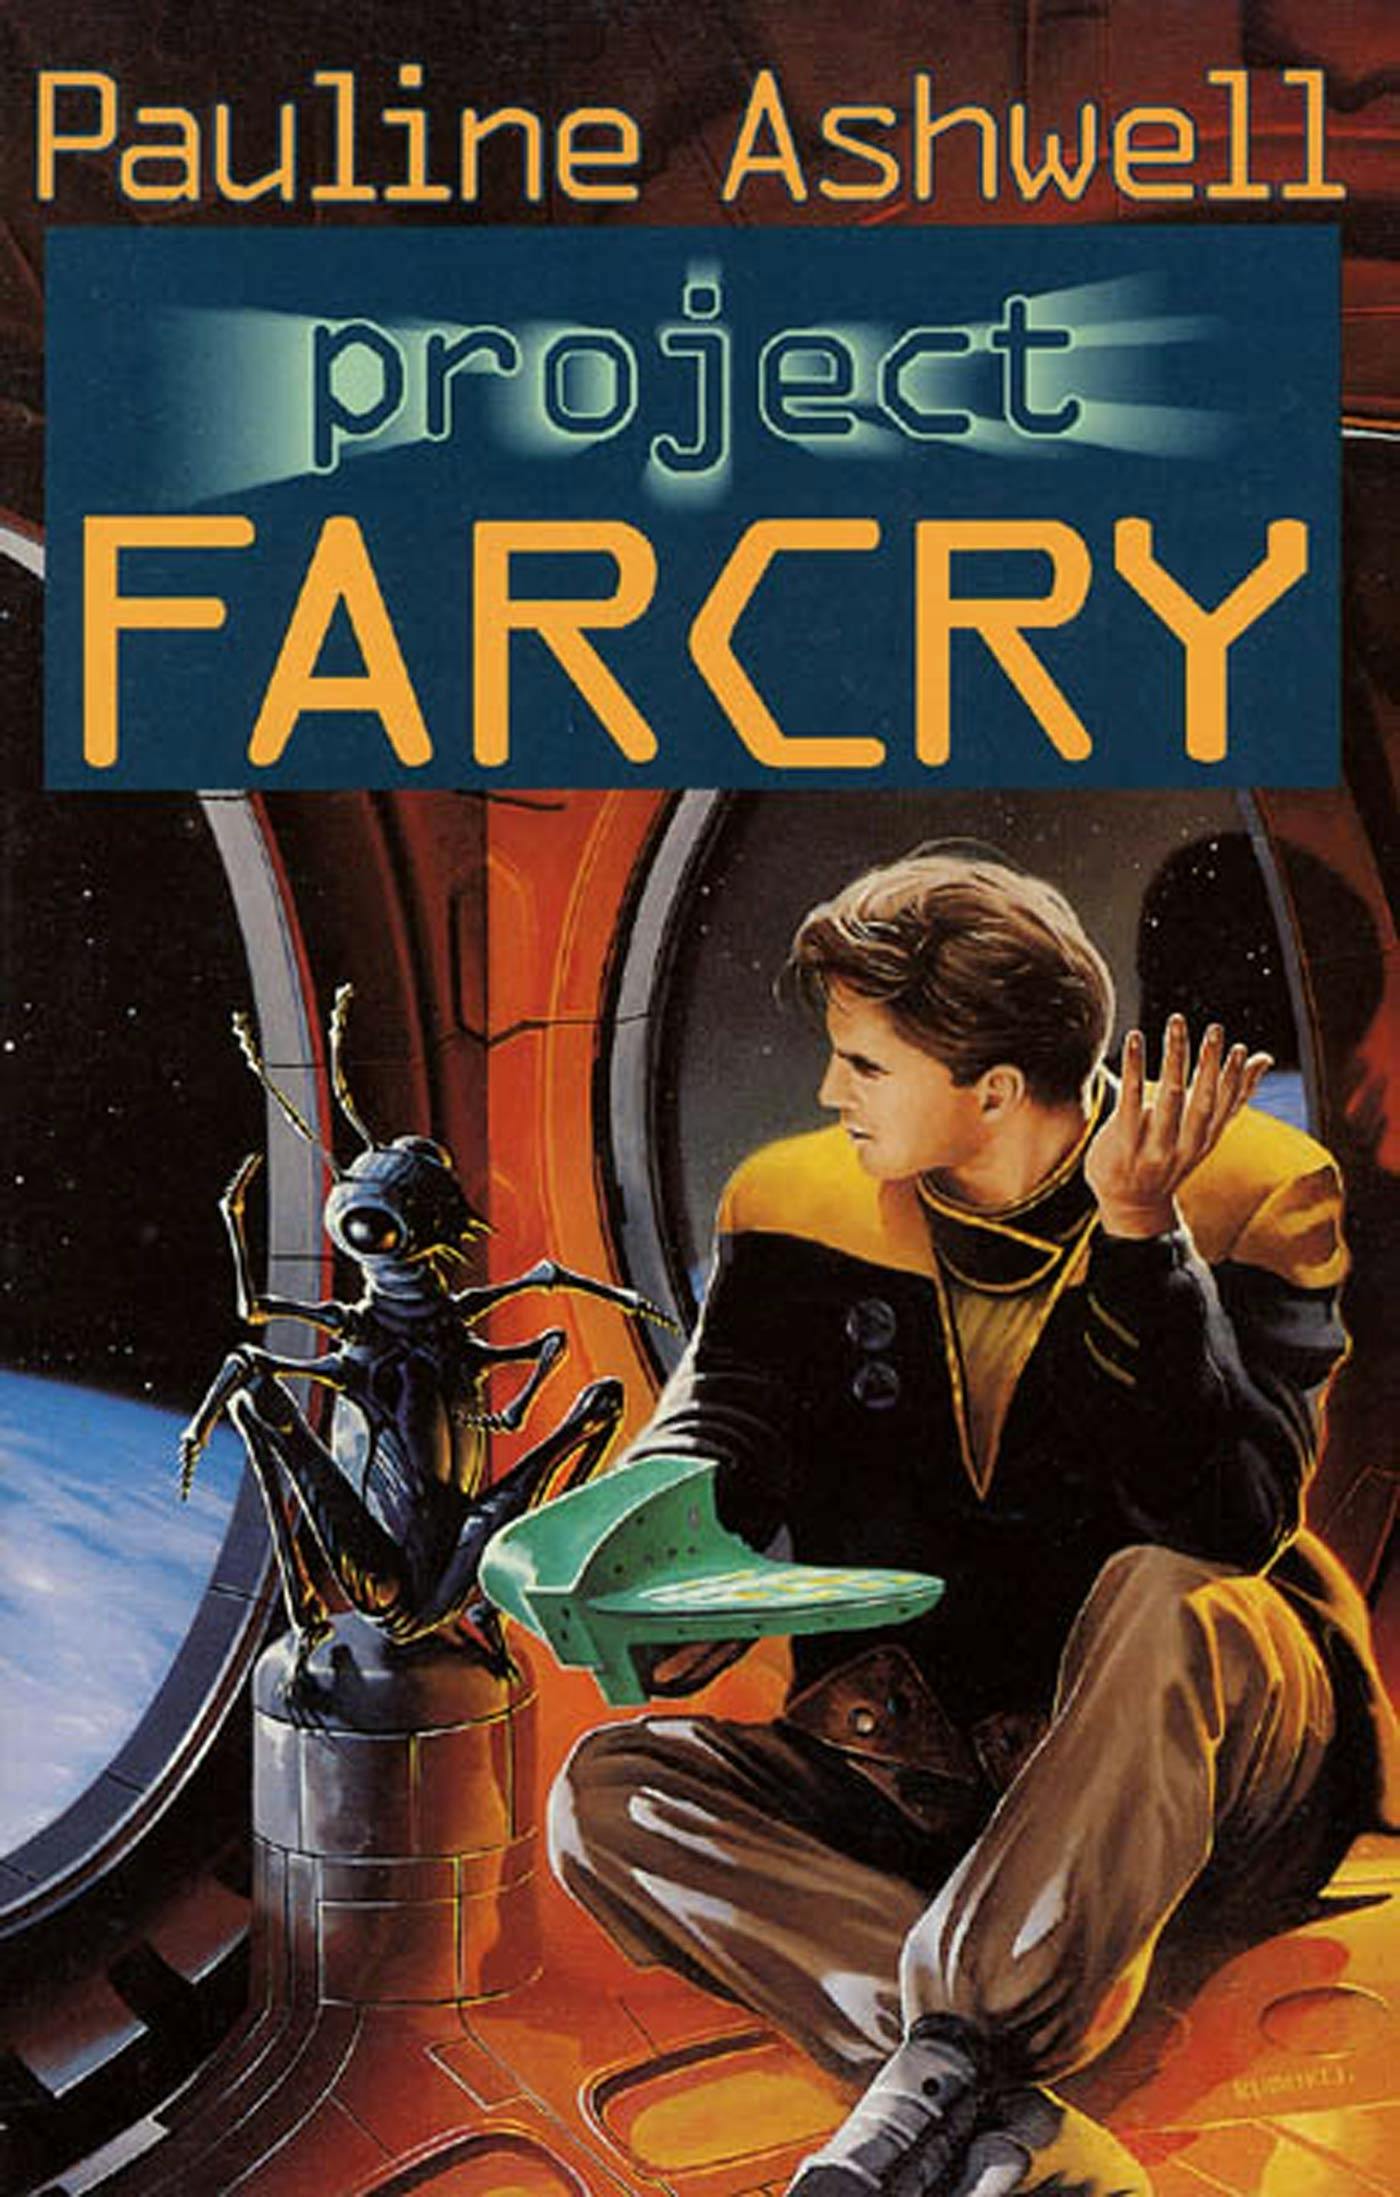 Cover for the book titled as: Project Farcry